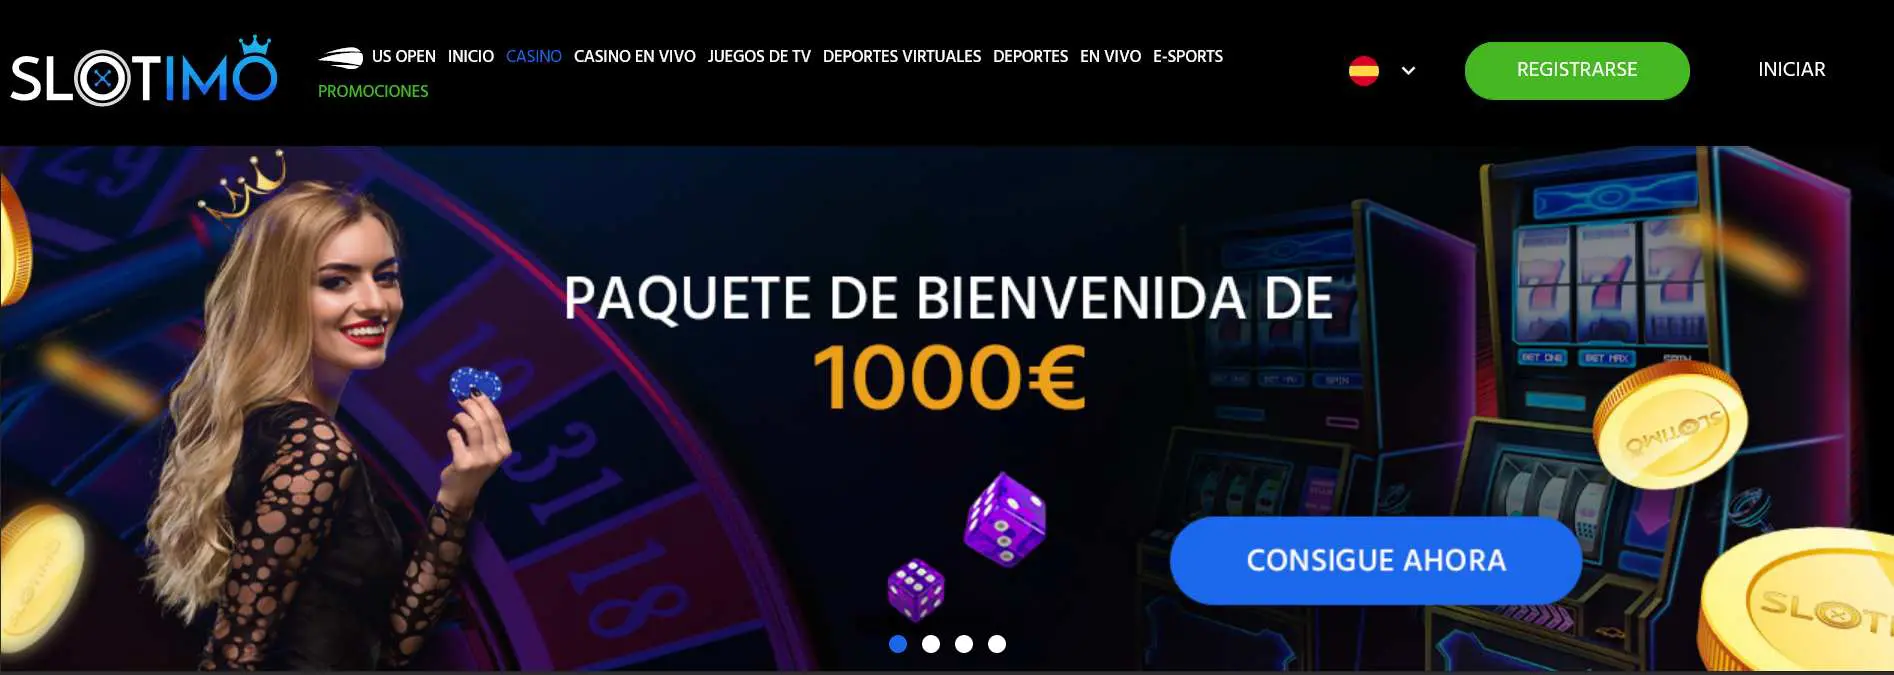 Earning a Six Figure Income From Indian online casinos with the best sign-up bonuses